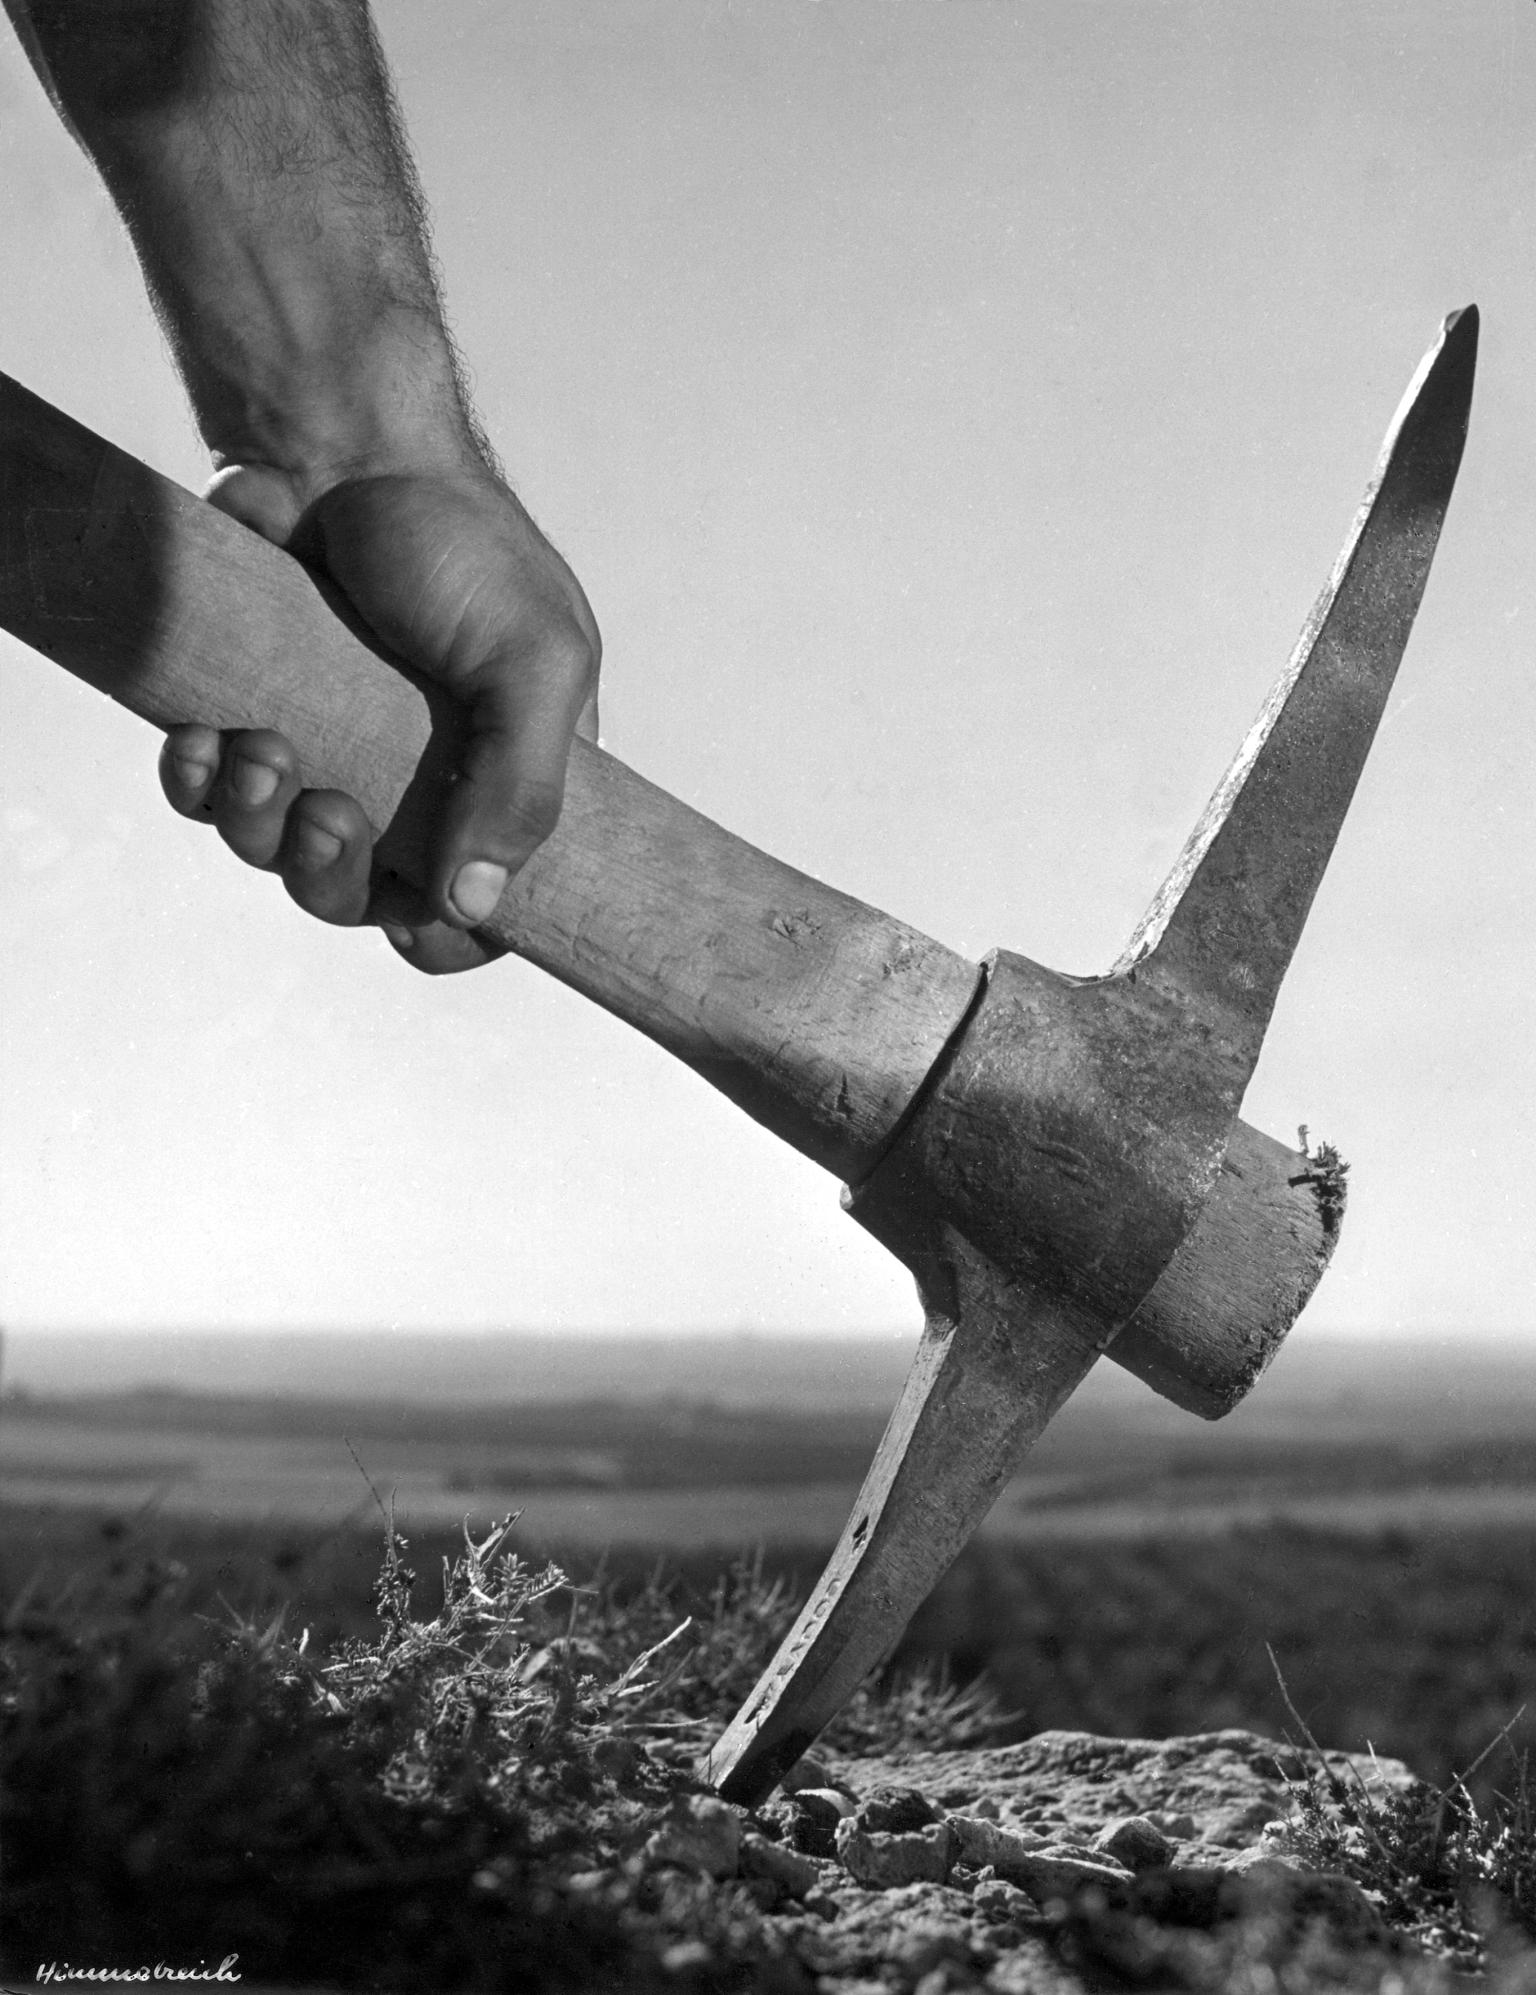 Photograph of a hand holding a garden pick with field in background.